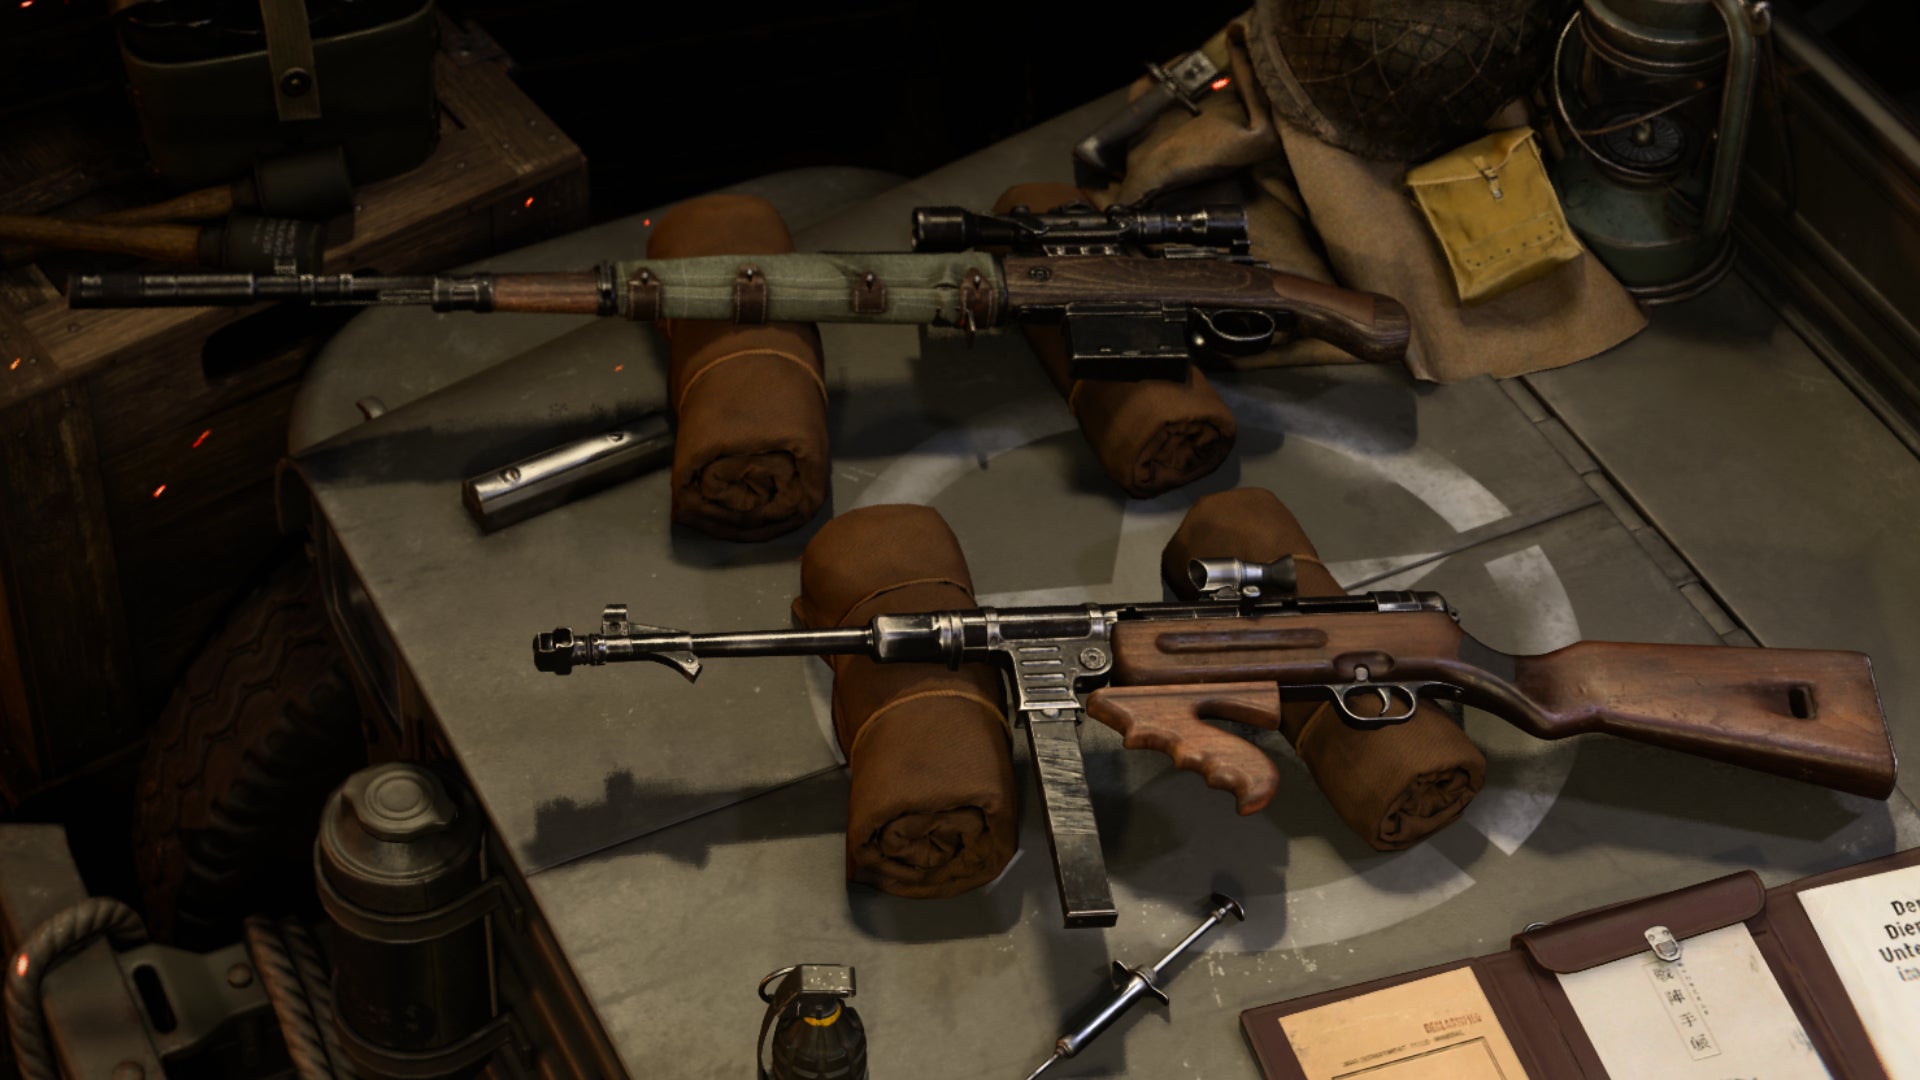 the Kar98k lying next to the MP40 in the Gunsmith screen of Call Of Duty: Vanguard.